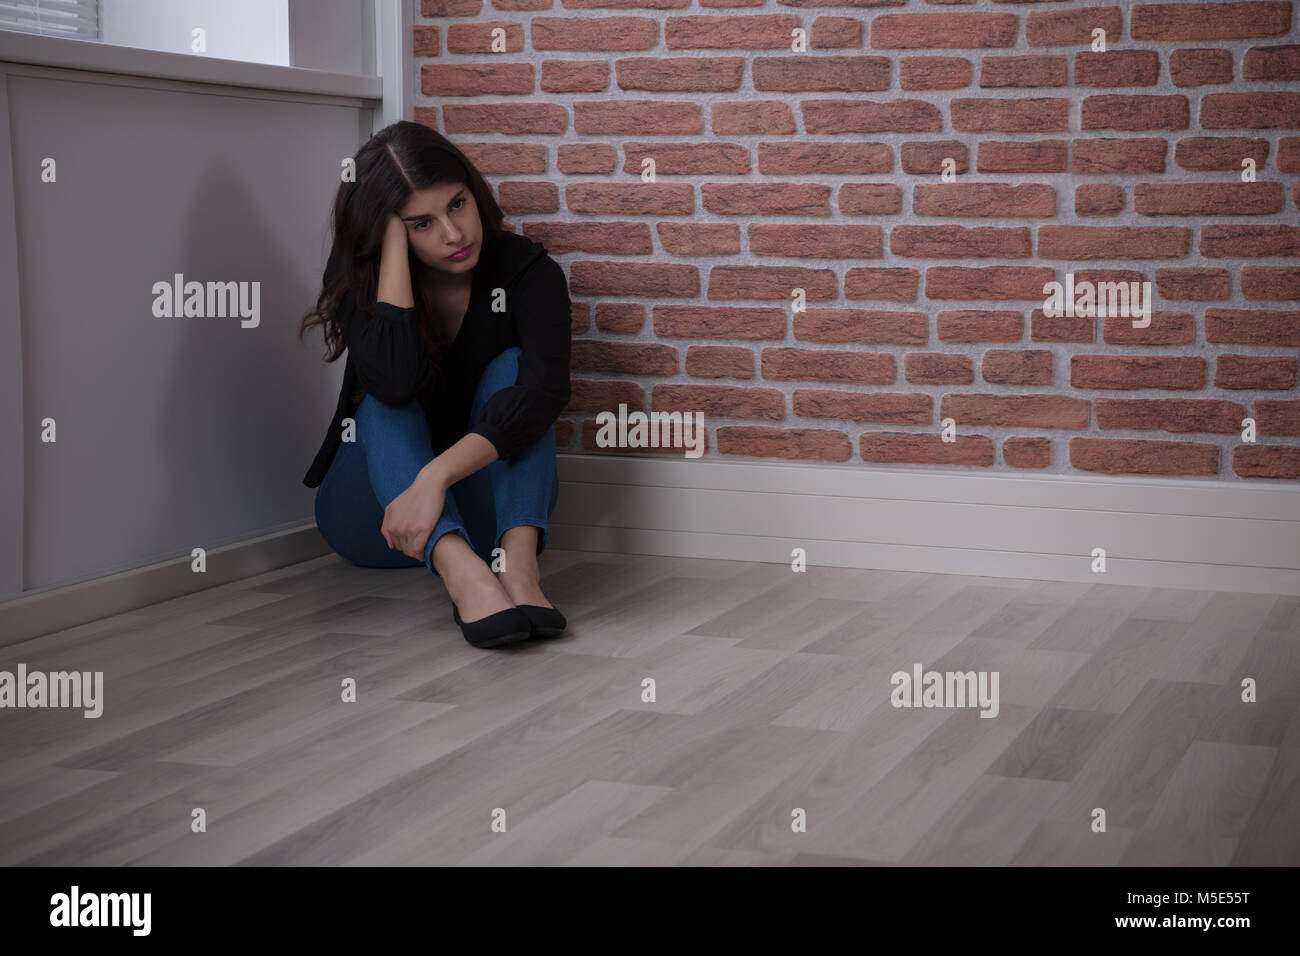 Sad Young Woman Sitting At The Corner Of The Room At Home Stock Photo